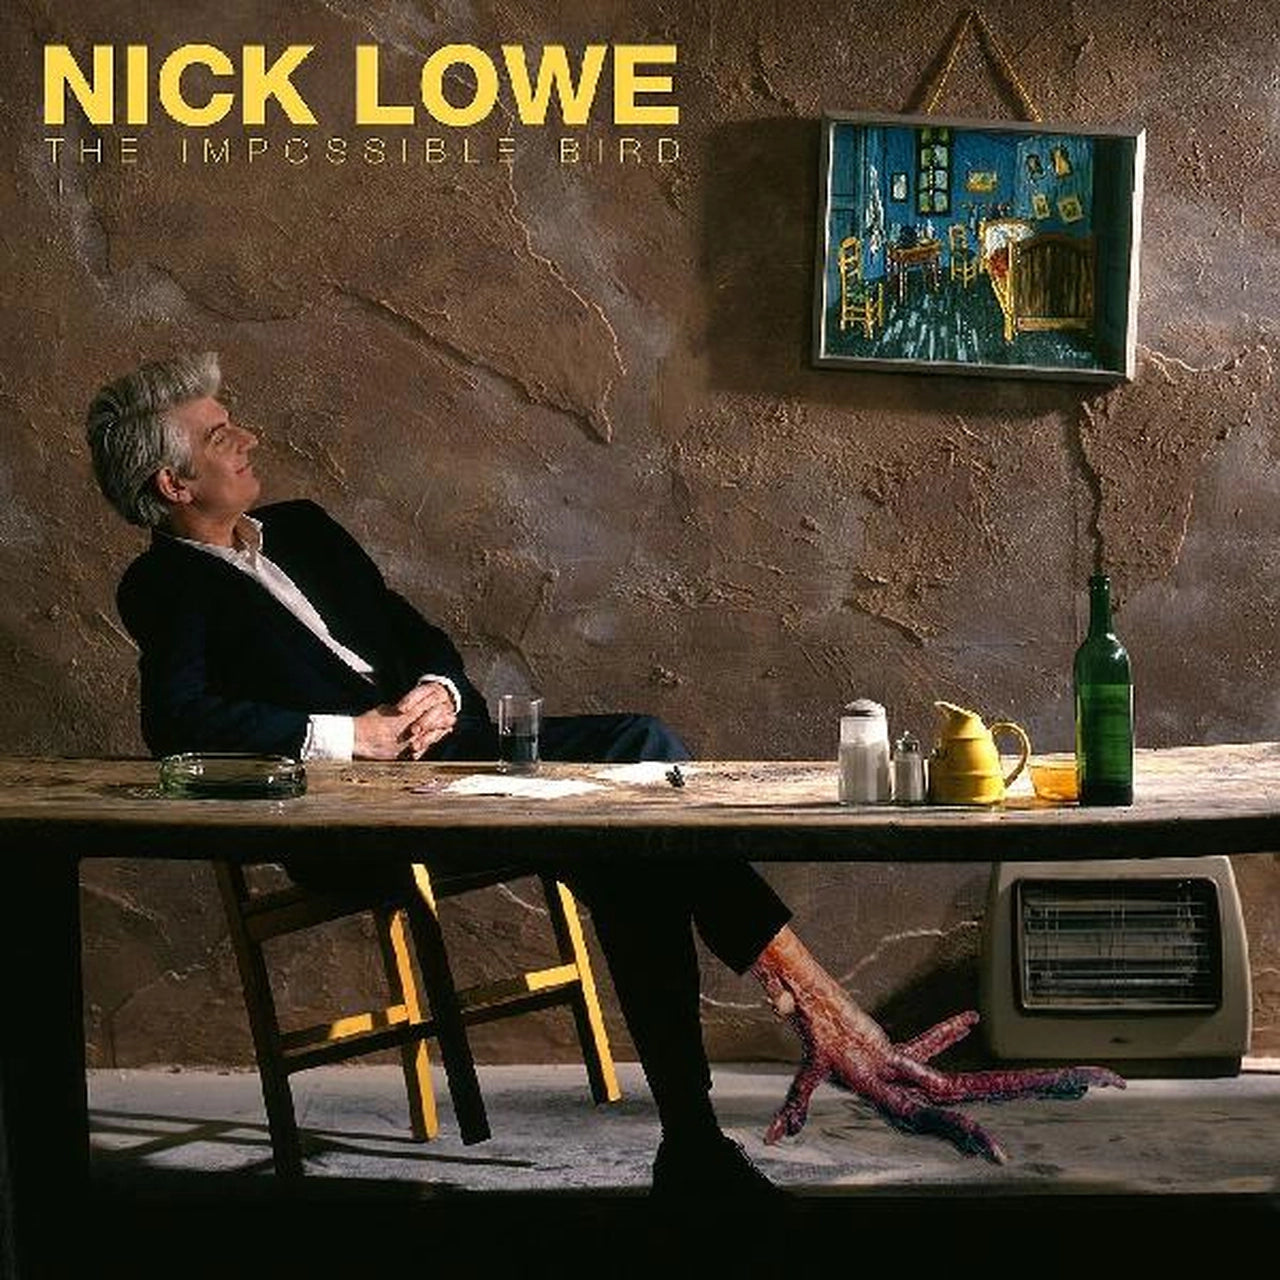 Nick Lowe - The Impossible Bird [LP] (remastered, download)